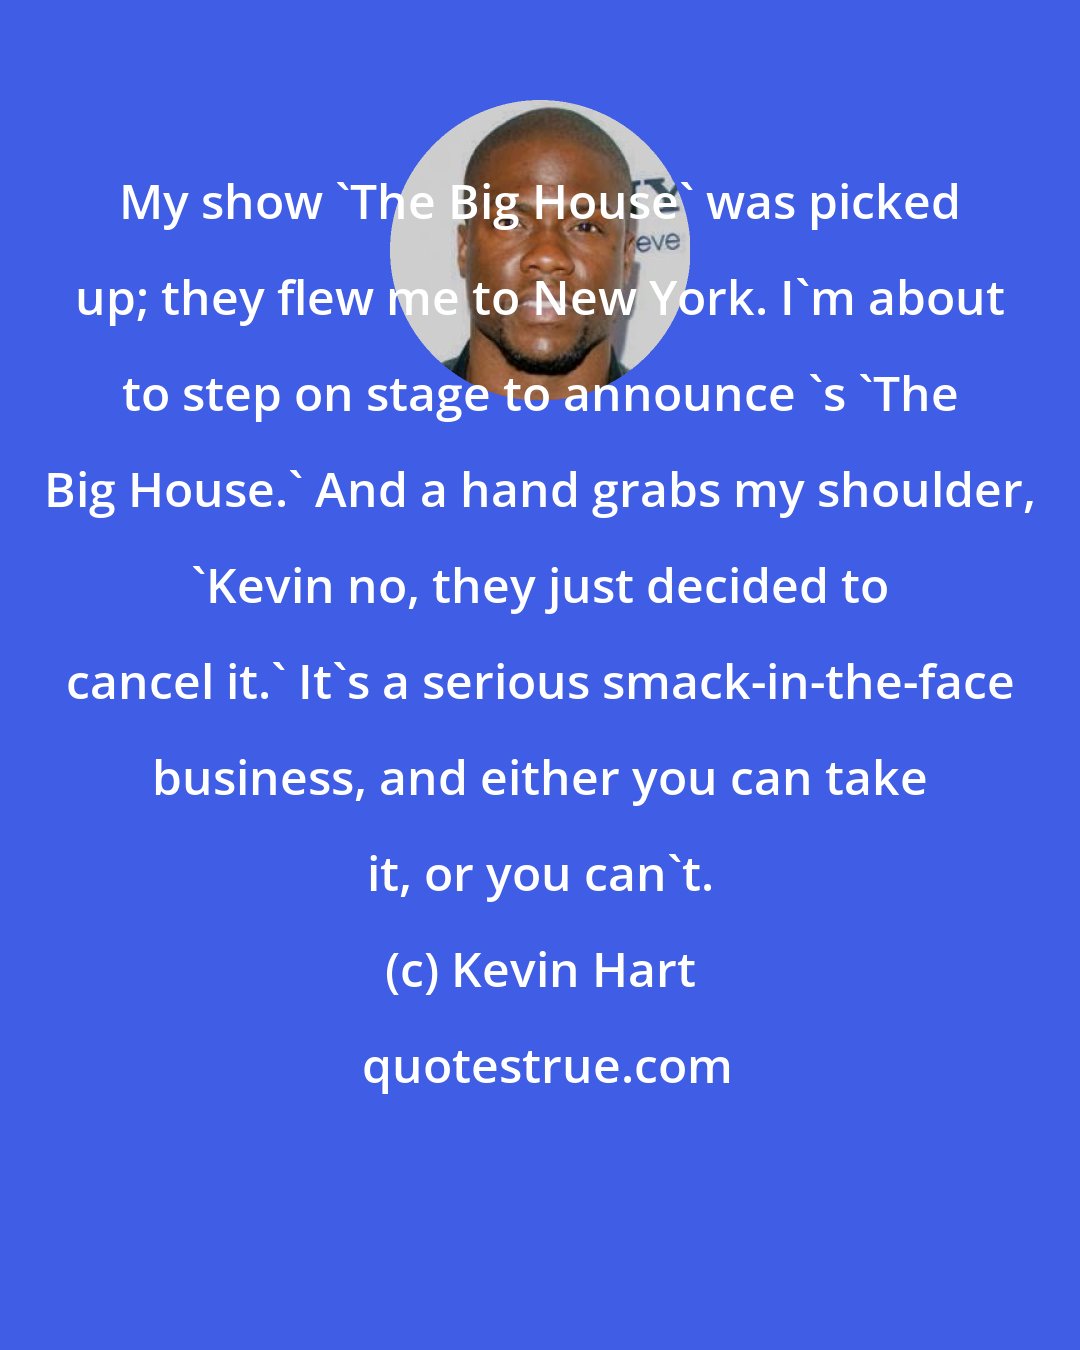 Kevin Hart: My show 'The Big House' was picked up; they flew me to New York. I'm about to step on stage to announce 's 'The Big House.' And a hand grabs my shoulder, 'Kevin no, they just decided to cancel it.' It's a serious smack-in-the-face business, and either you can take it, or you can't.